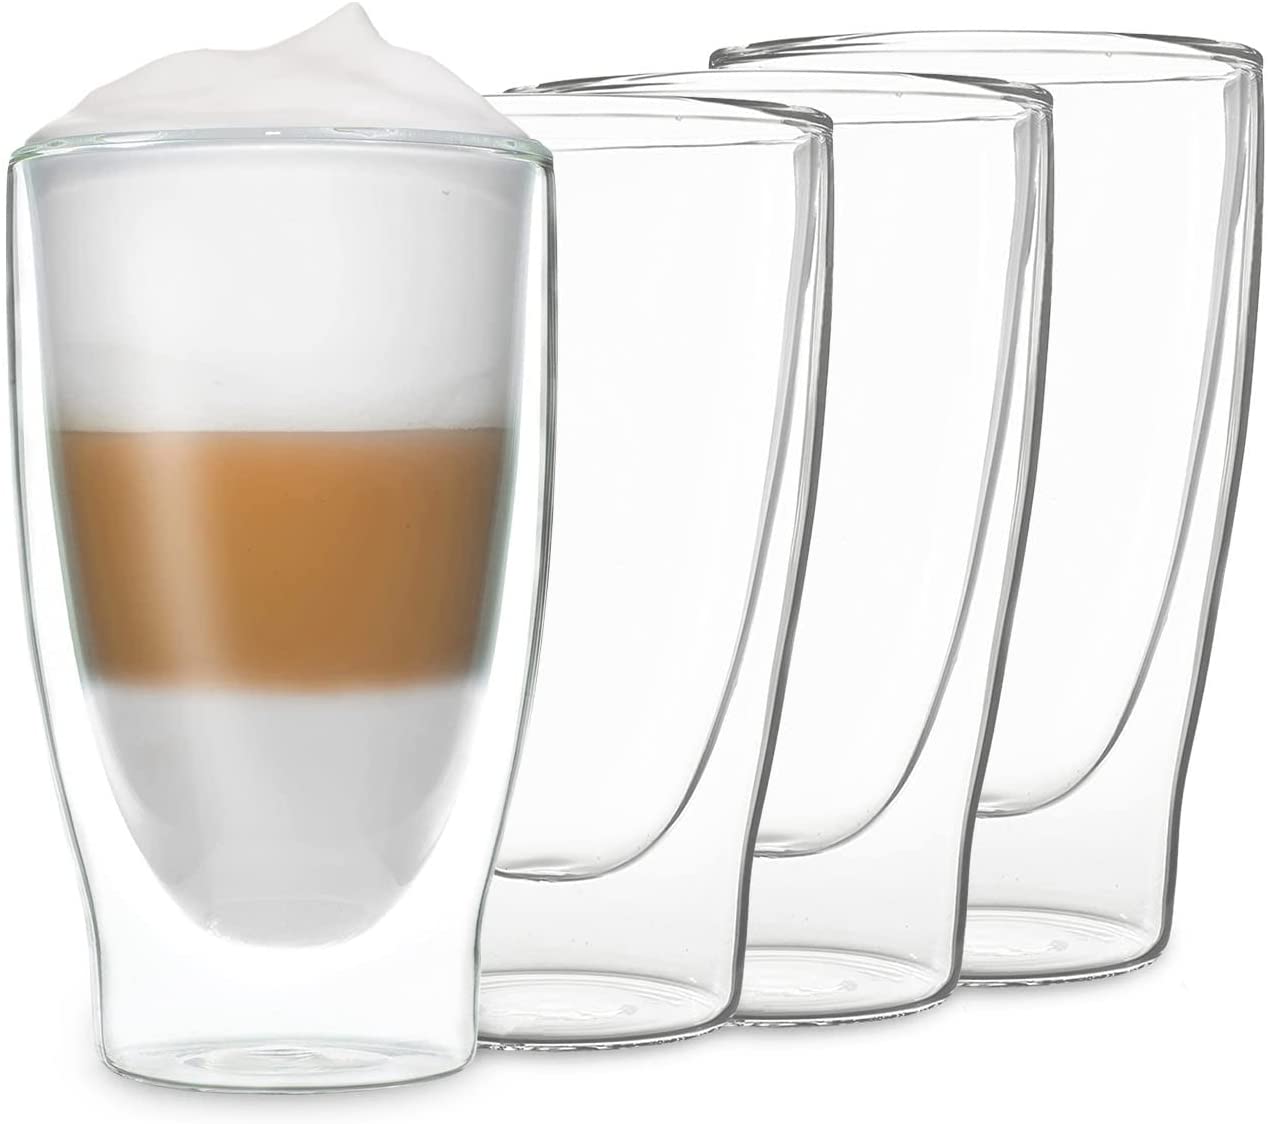 DUOS Feelino Double-Walled Thermal Tea Glasses / Coffee Glasses with Floating Effect Keeps Drinks Warmer for Longer and Cold Cold for Longer